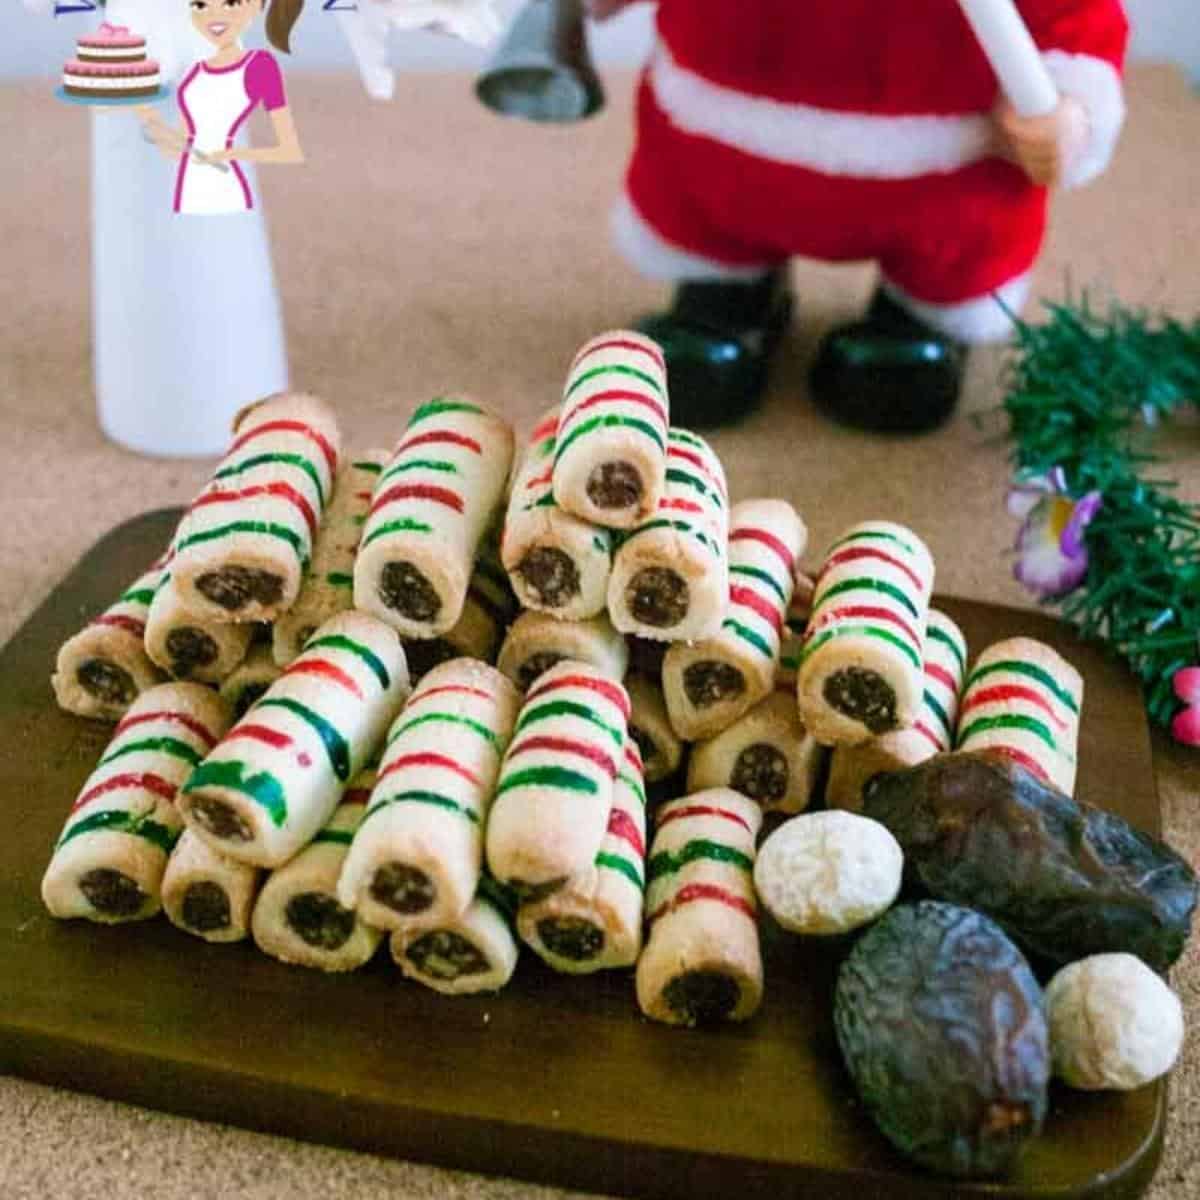 A wooden board with Christmas cookies